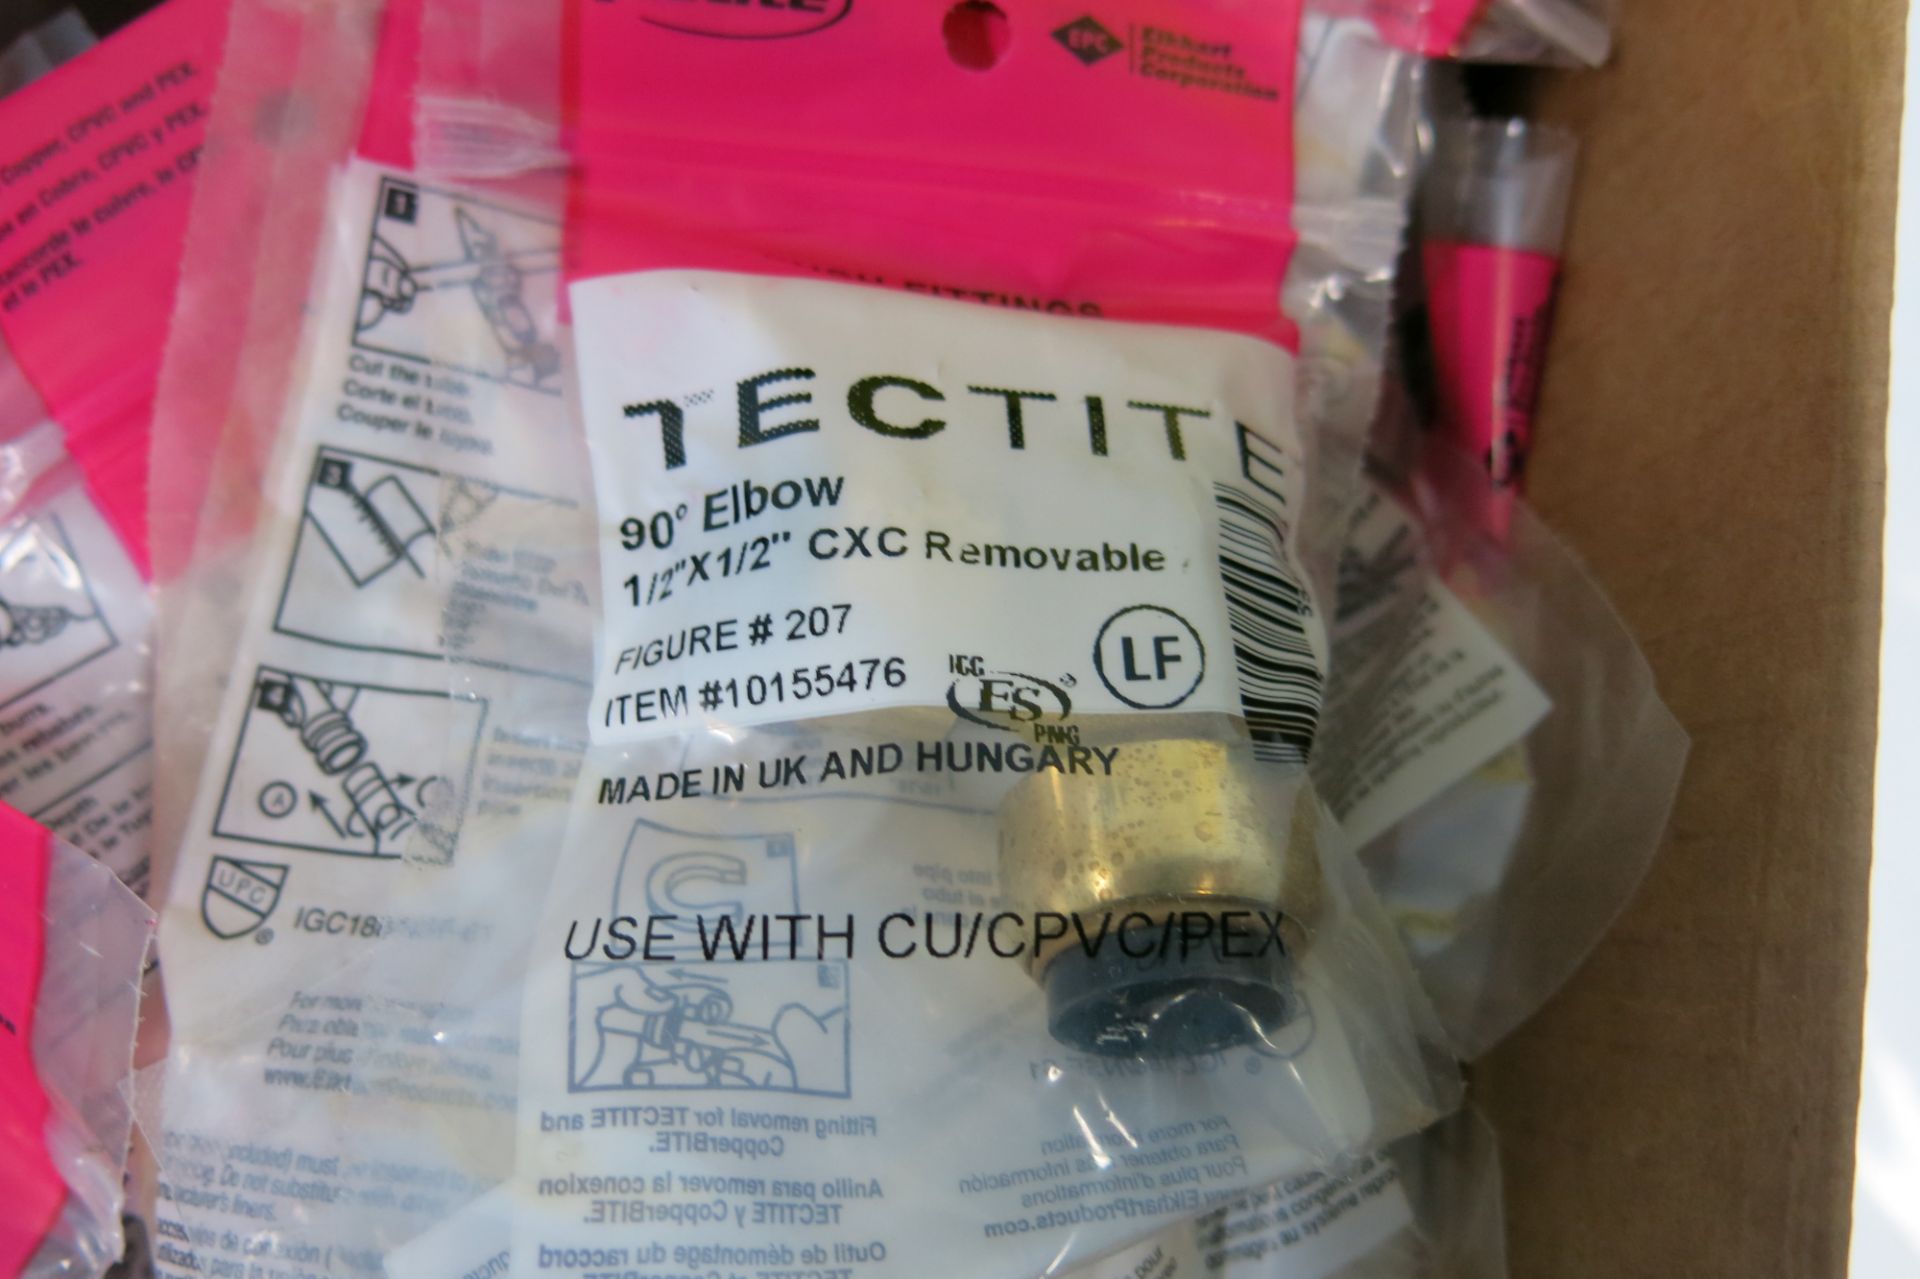 LOT OF (50) TECTITE, 1/2" X 1/2", CXC REMOVABLE, 90° ELBOW - NEW (LOCATED IN MISSISSAUGA) - Image 2 of 3